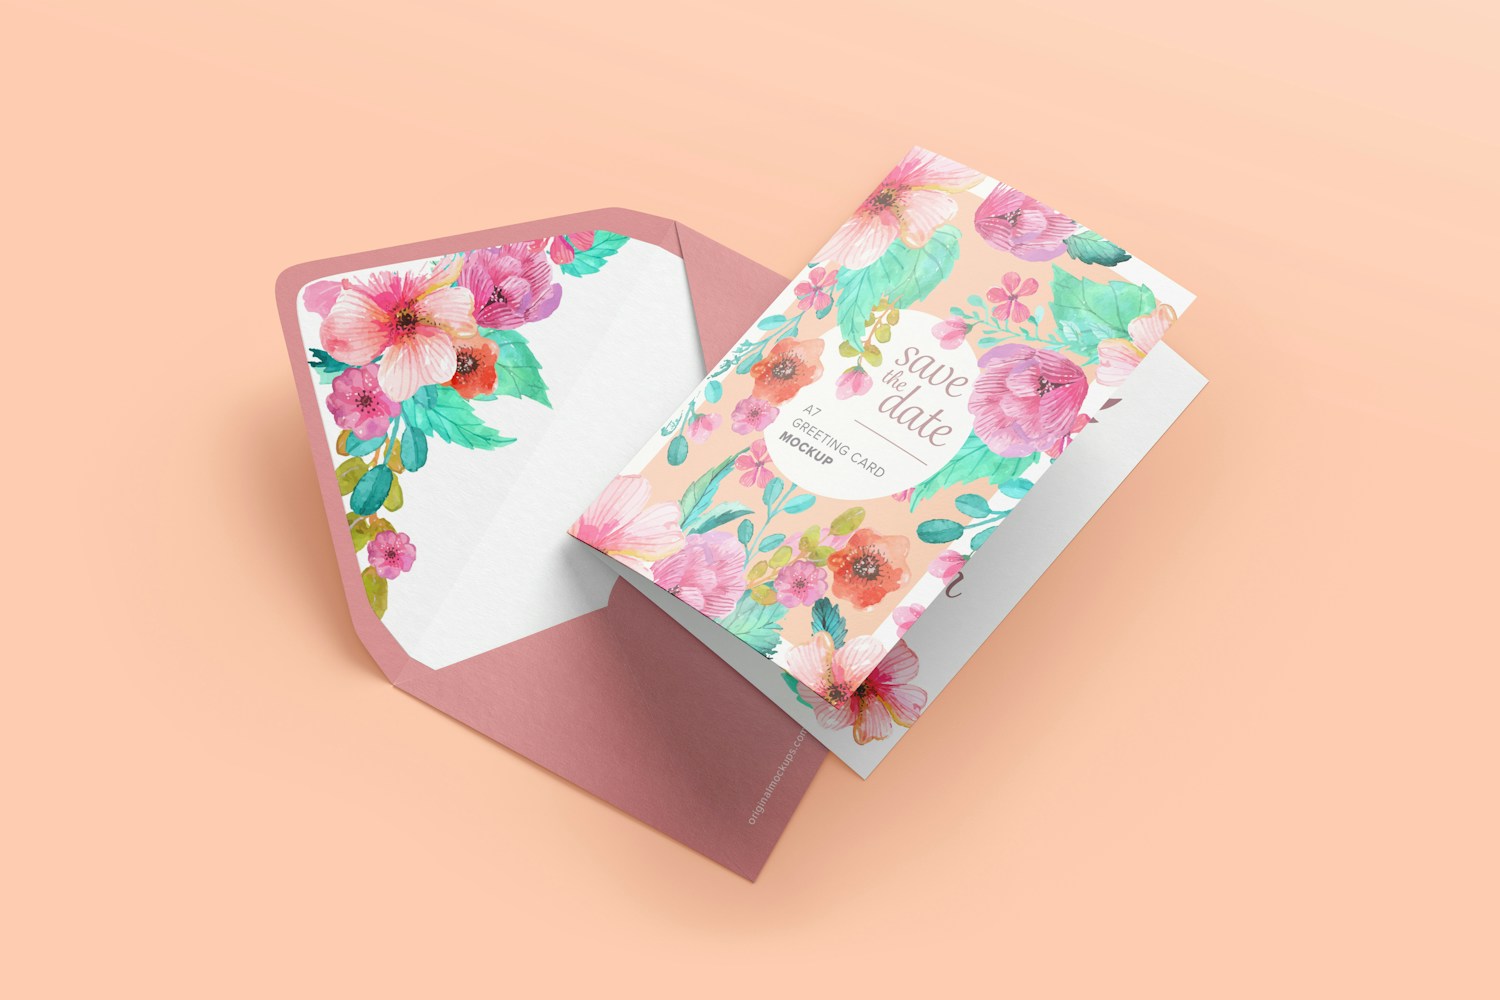 A7 Greeting Card Mockup with Envelope, Closed